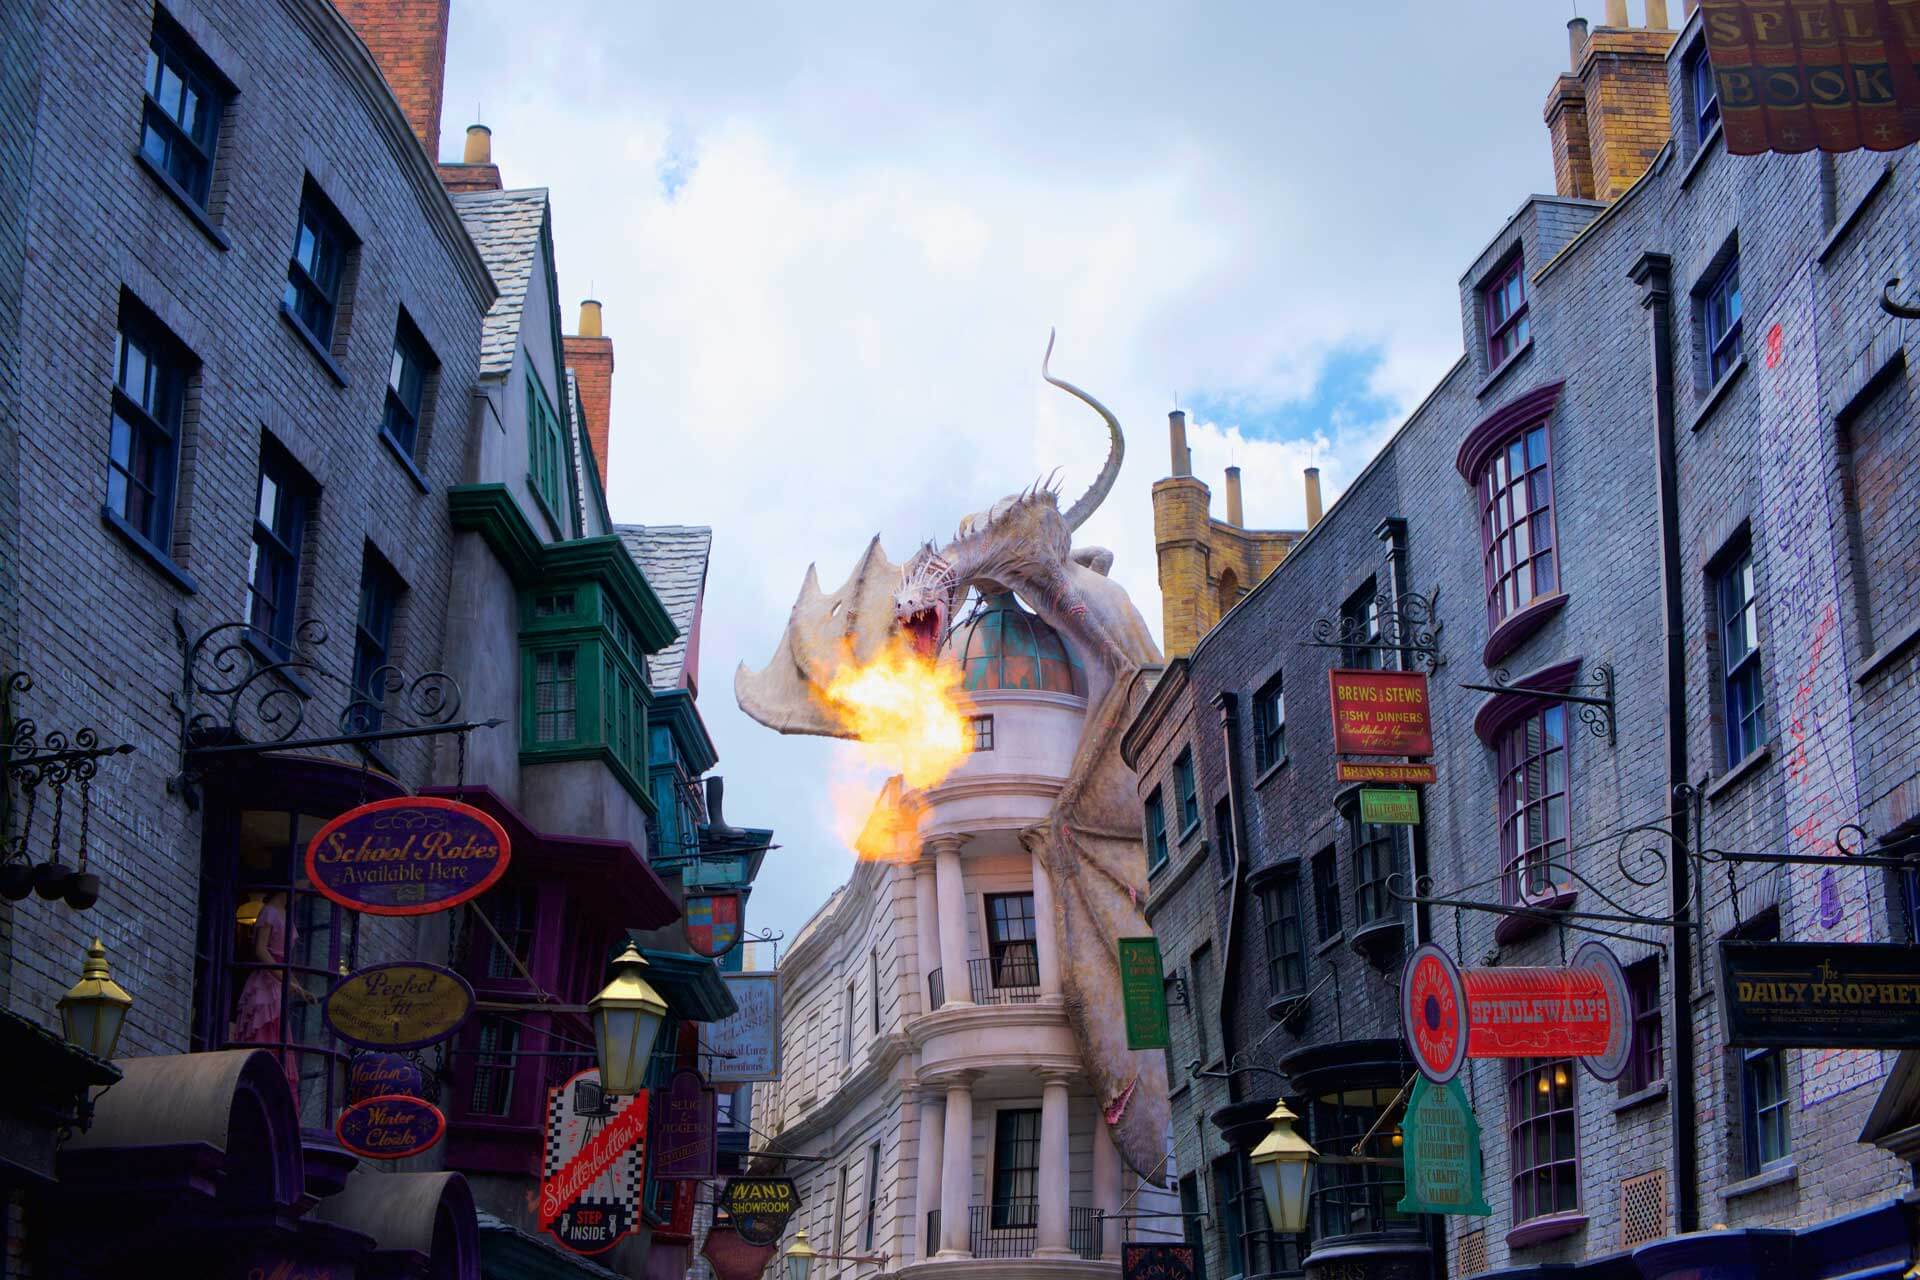 The Wizarding World of Harry Potter Diagon Alley